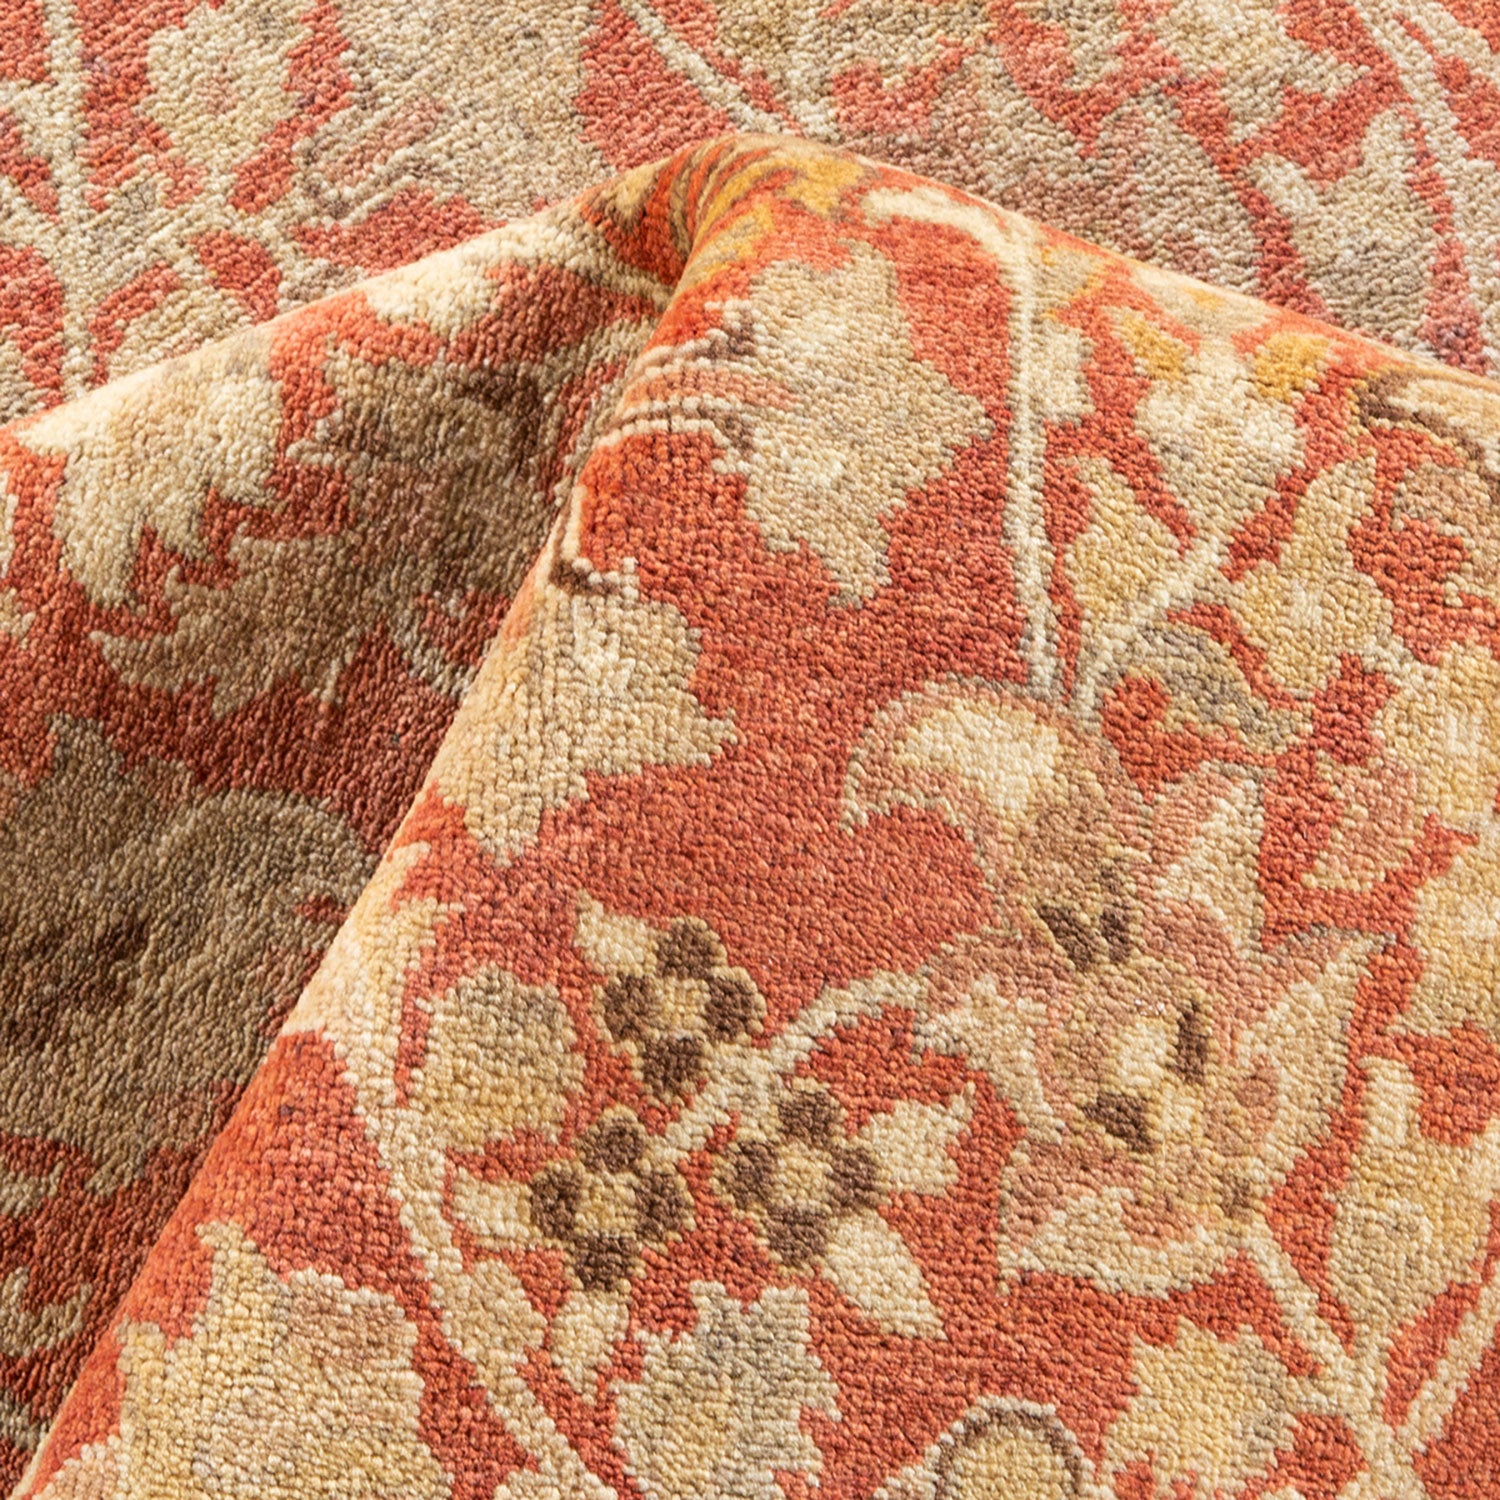 Close-up of a plush, floral-patterned carpet with warm earth tones.